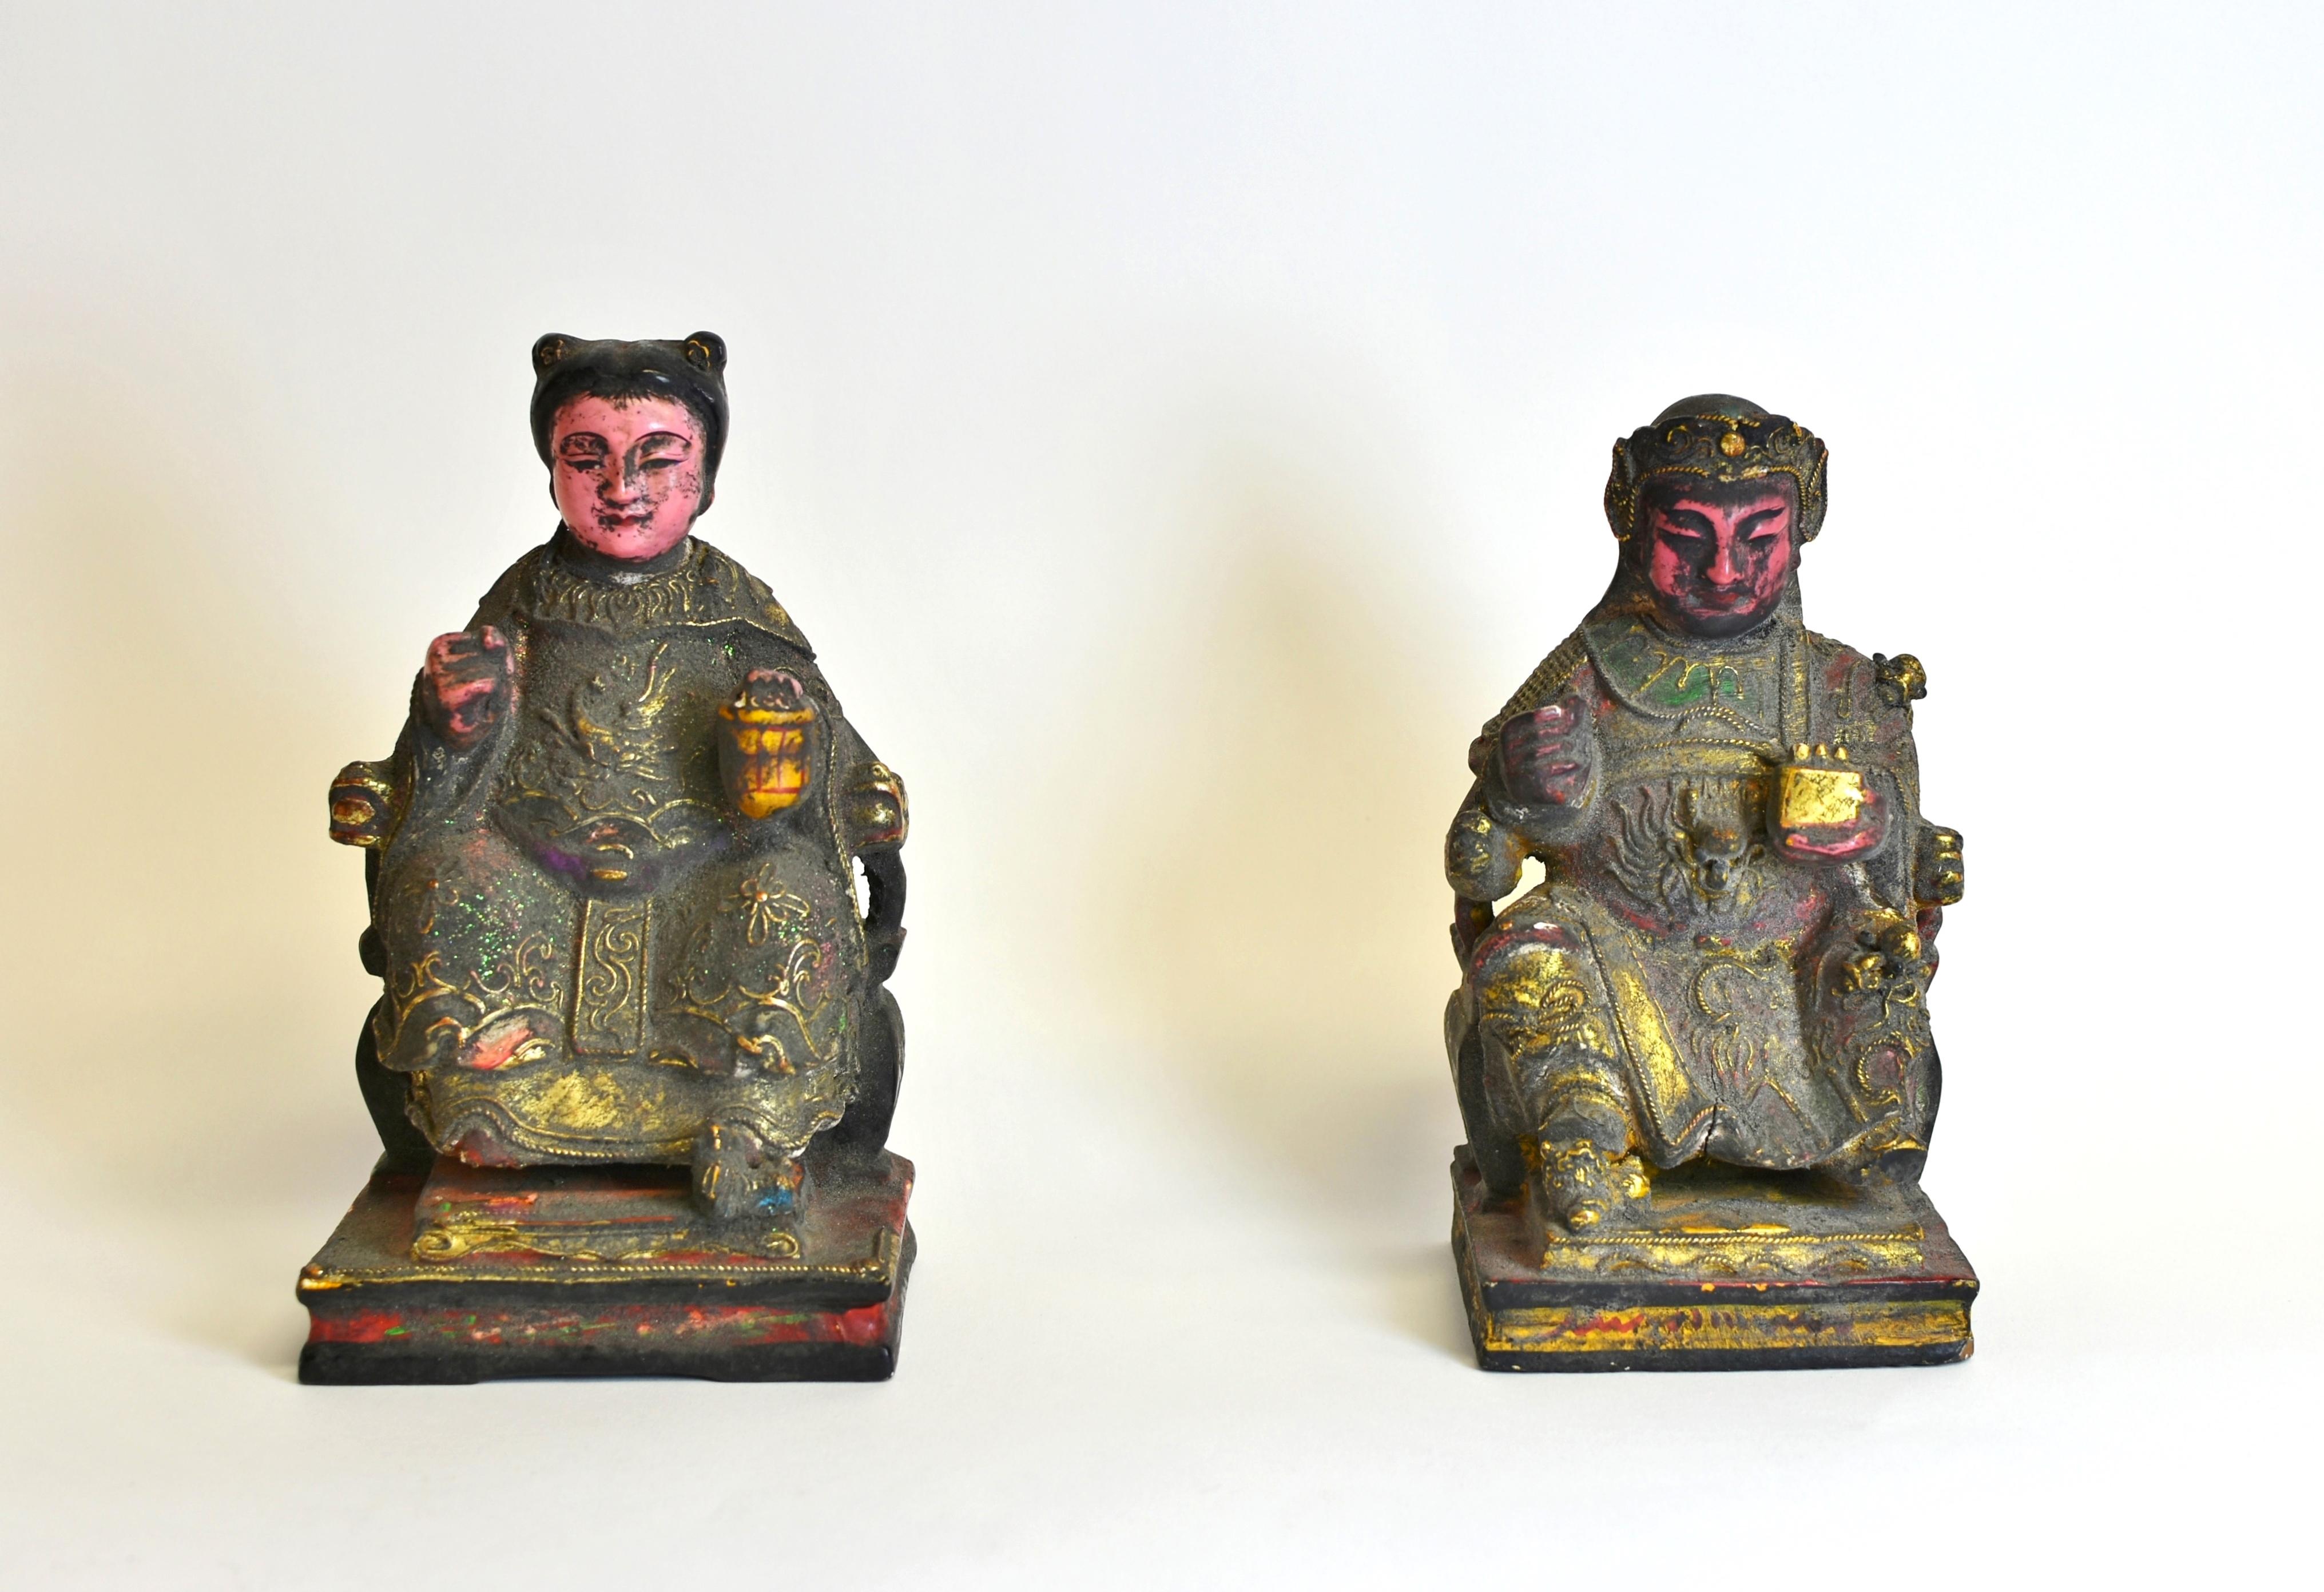 A rare collection of 5 antique wood statues of Chinese Bodhisattvas. All seated in horseshoe round back chairs, the collection features Celestial Empress (front row center), flanked by an Imperial General (right) and an Imperial Advisor (left),